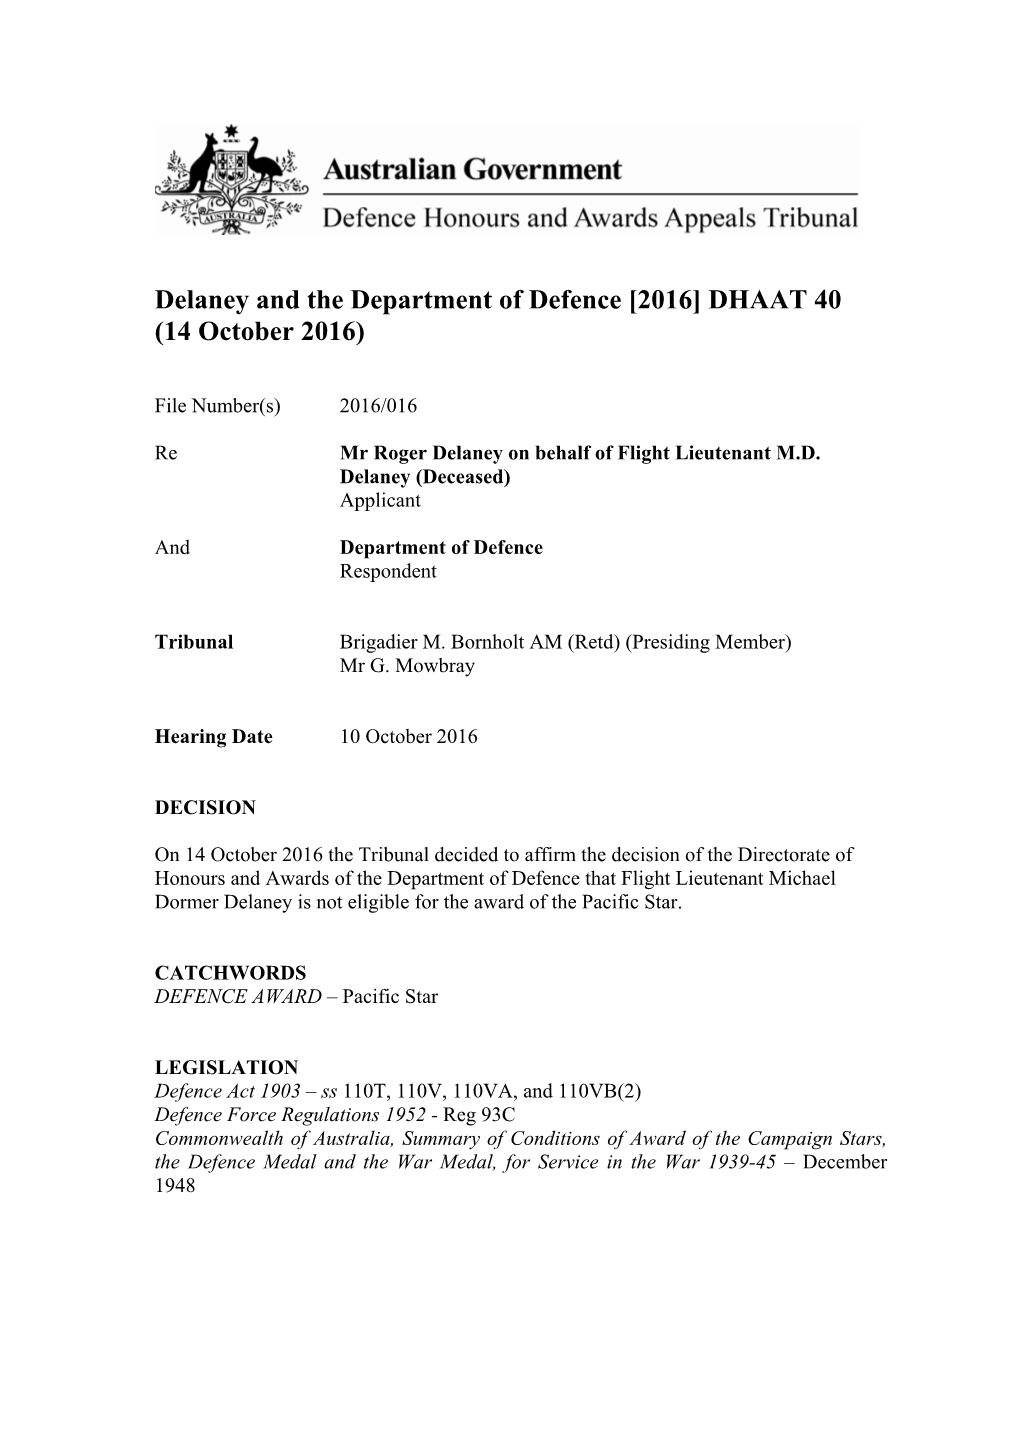 Delaney and the Department of Defence [2016] DHAAT 40 (14 October 2016)